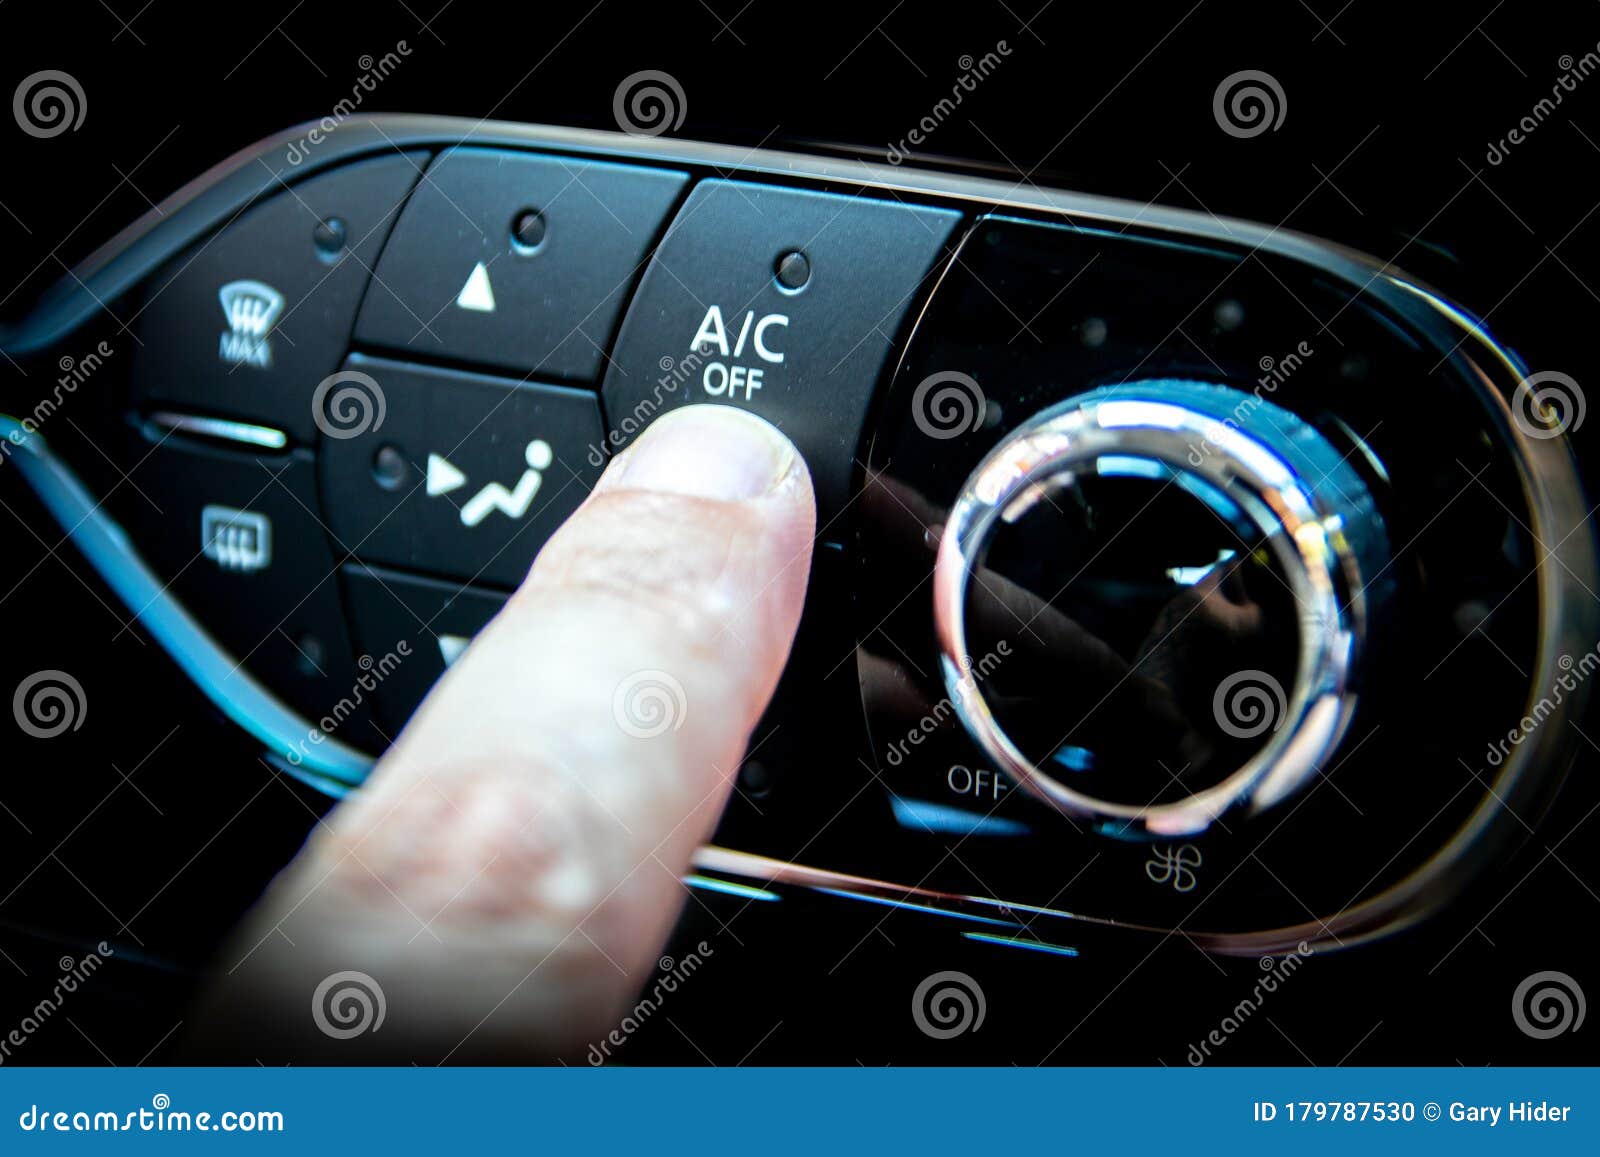 a finger pressing the a/c or air conditioning button on the dashboard of a car